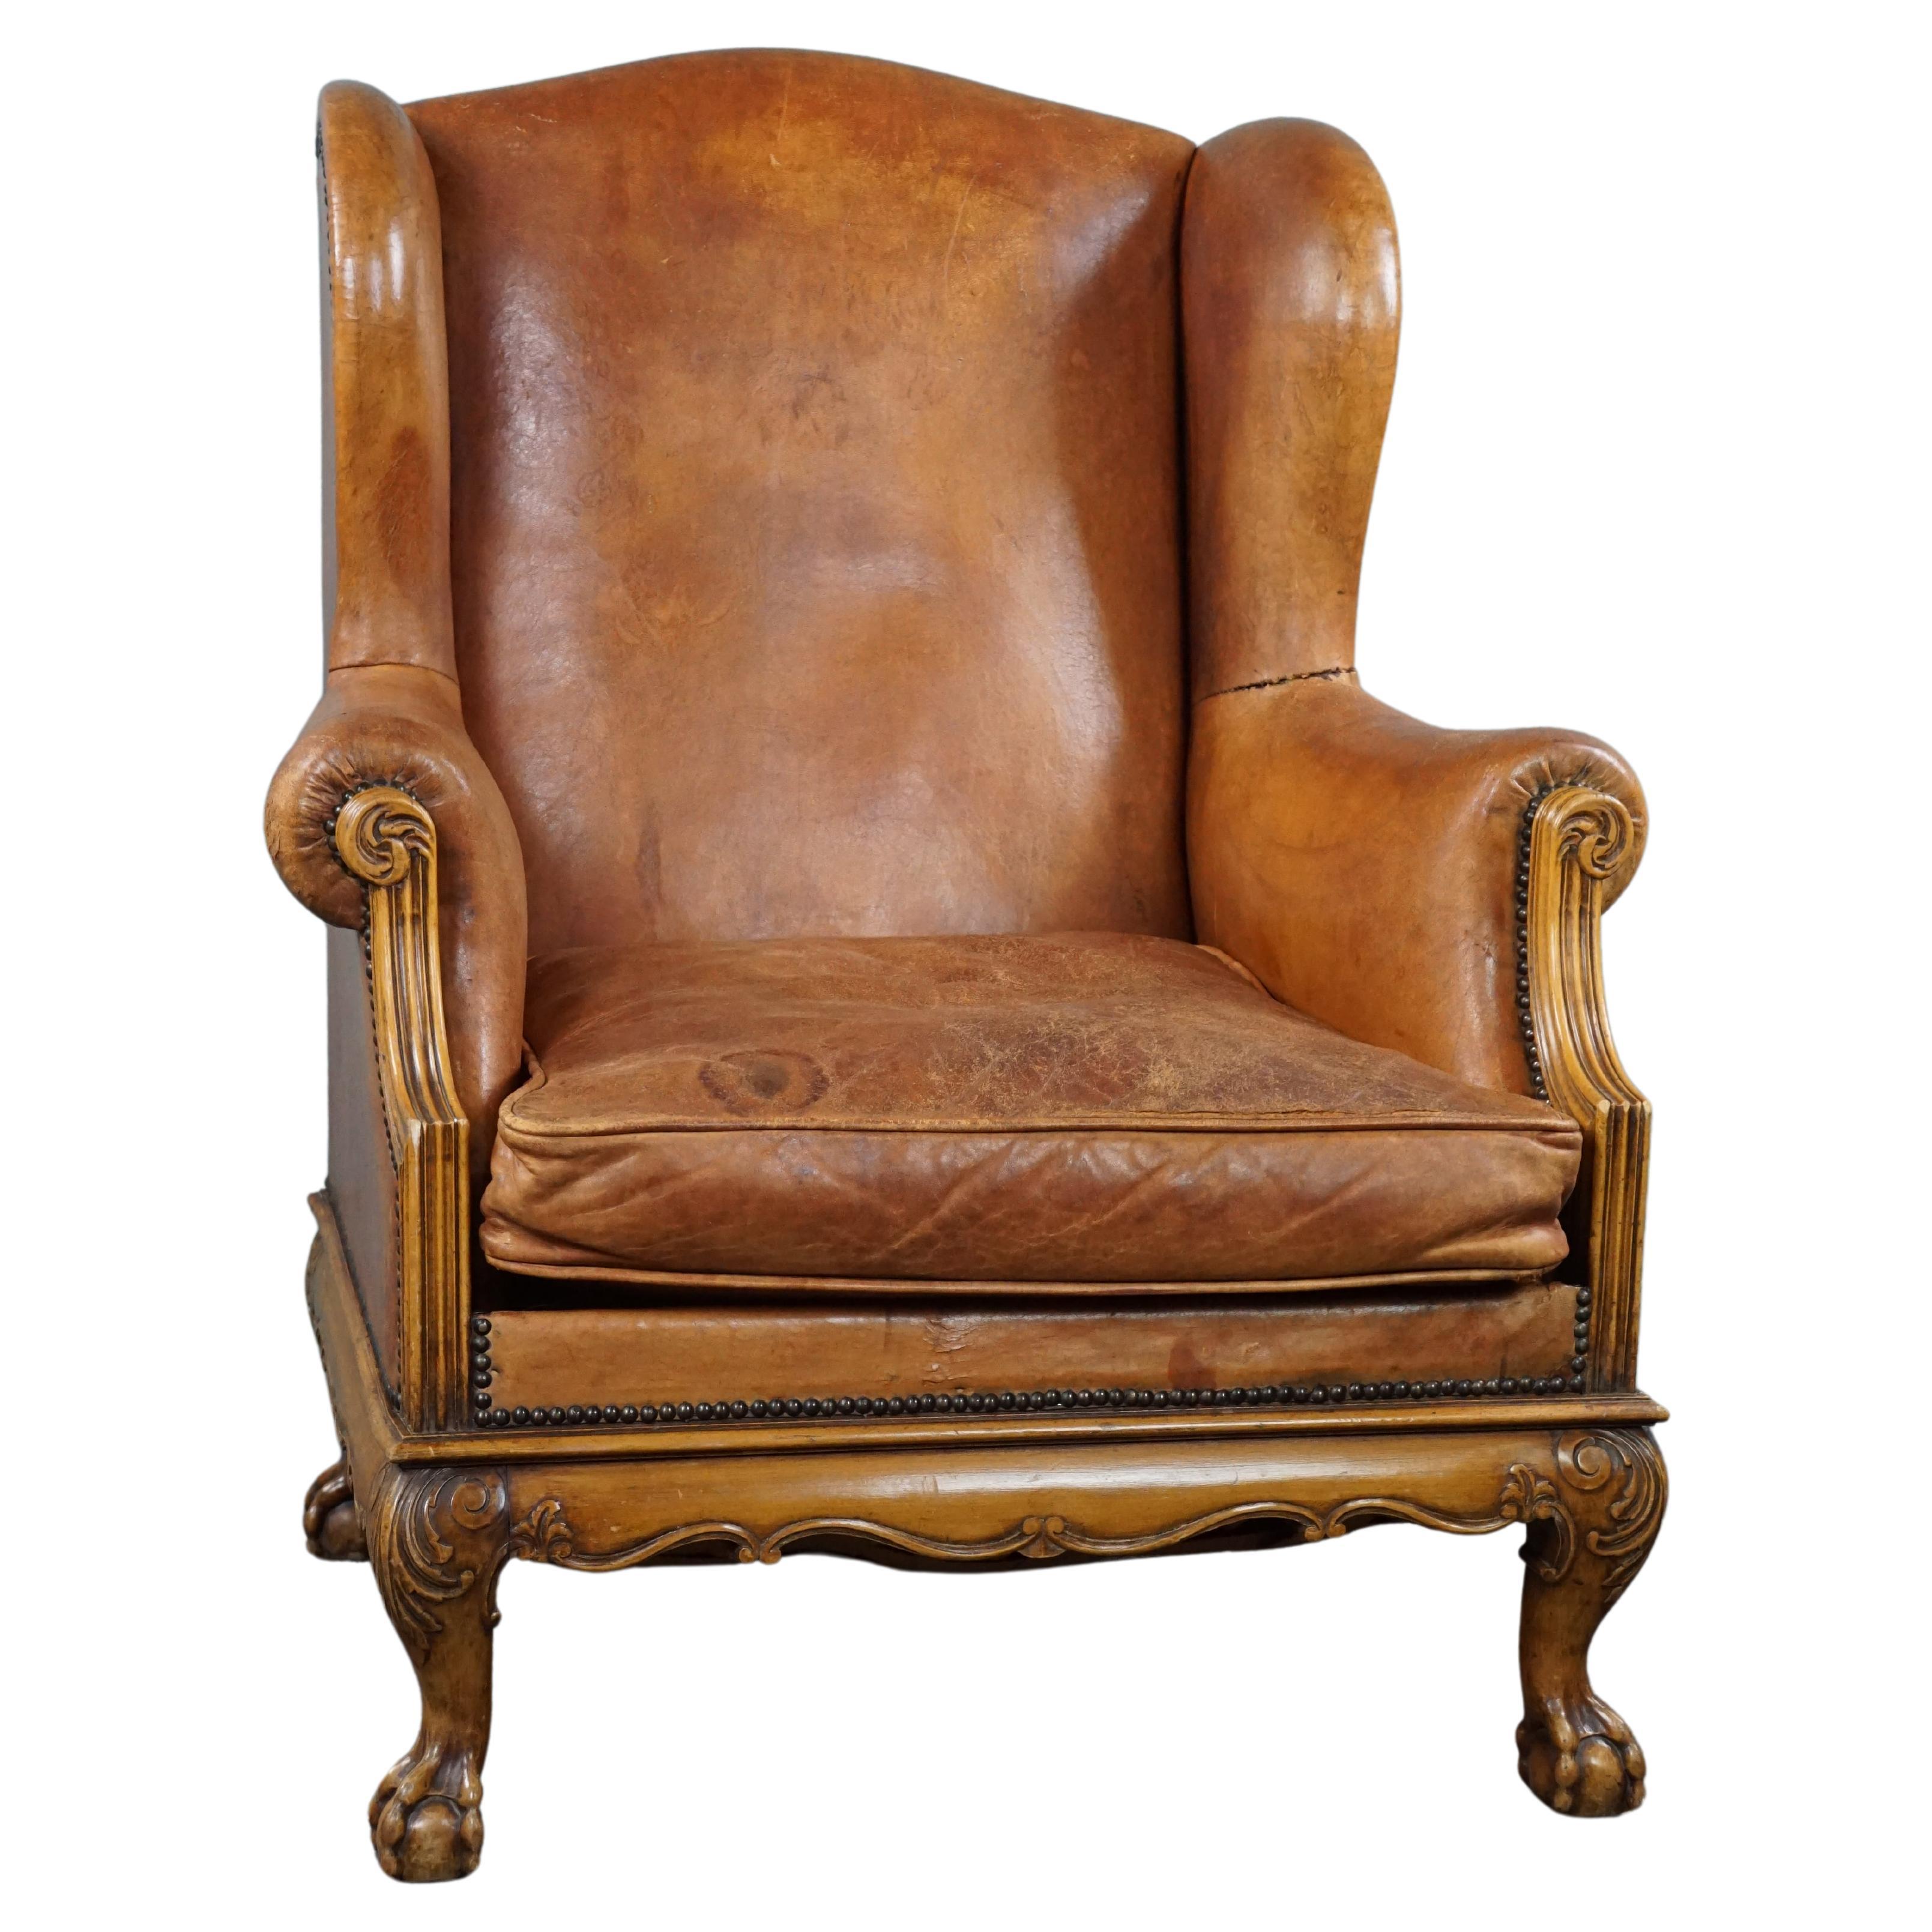 Sheep leather wing chair For Sale